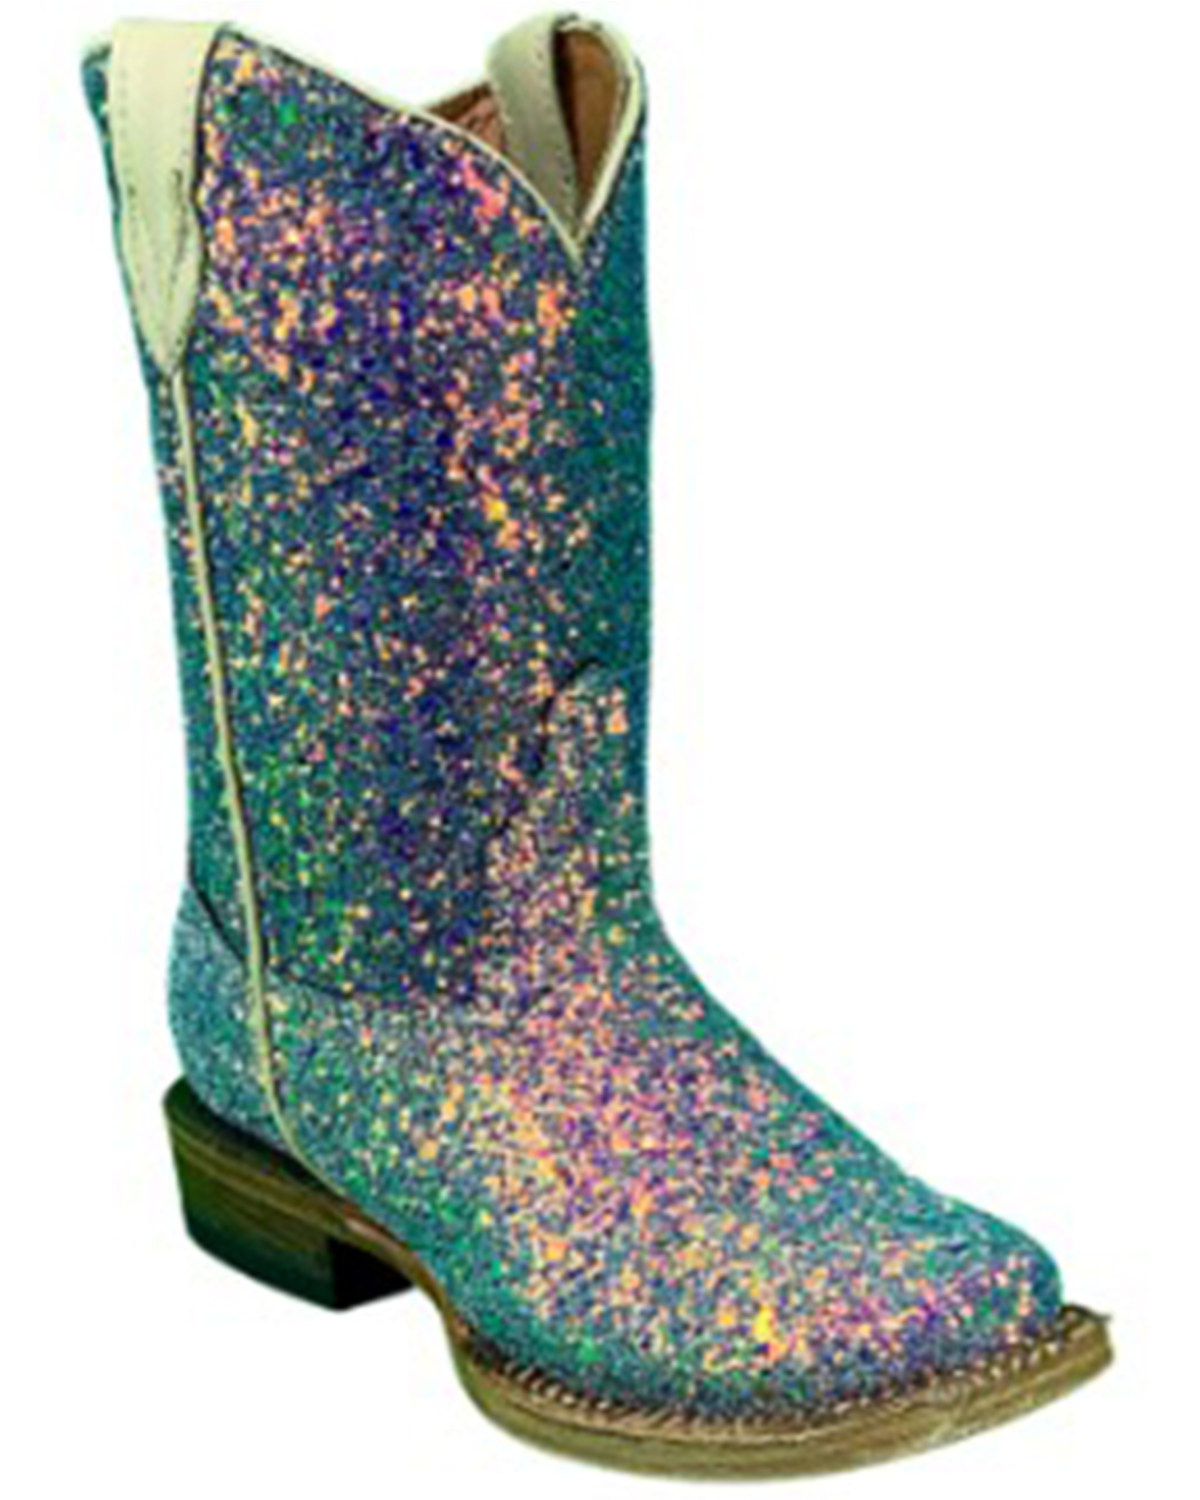 Tanner Mark Girls' Mermaid Western Boots - Broad Square Toe